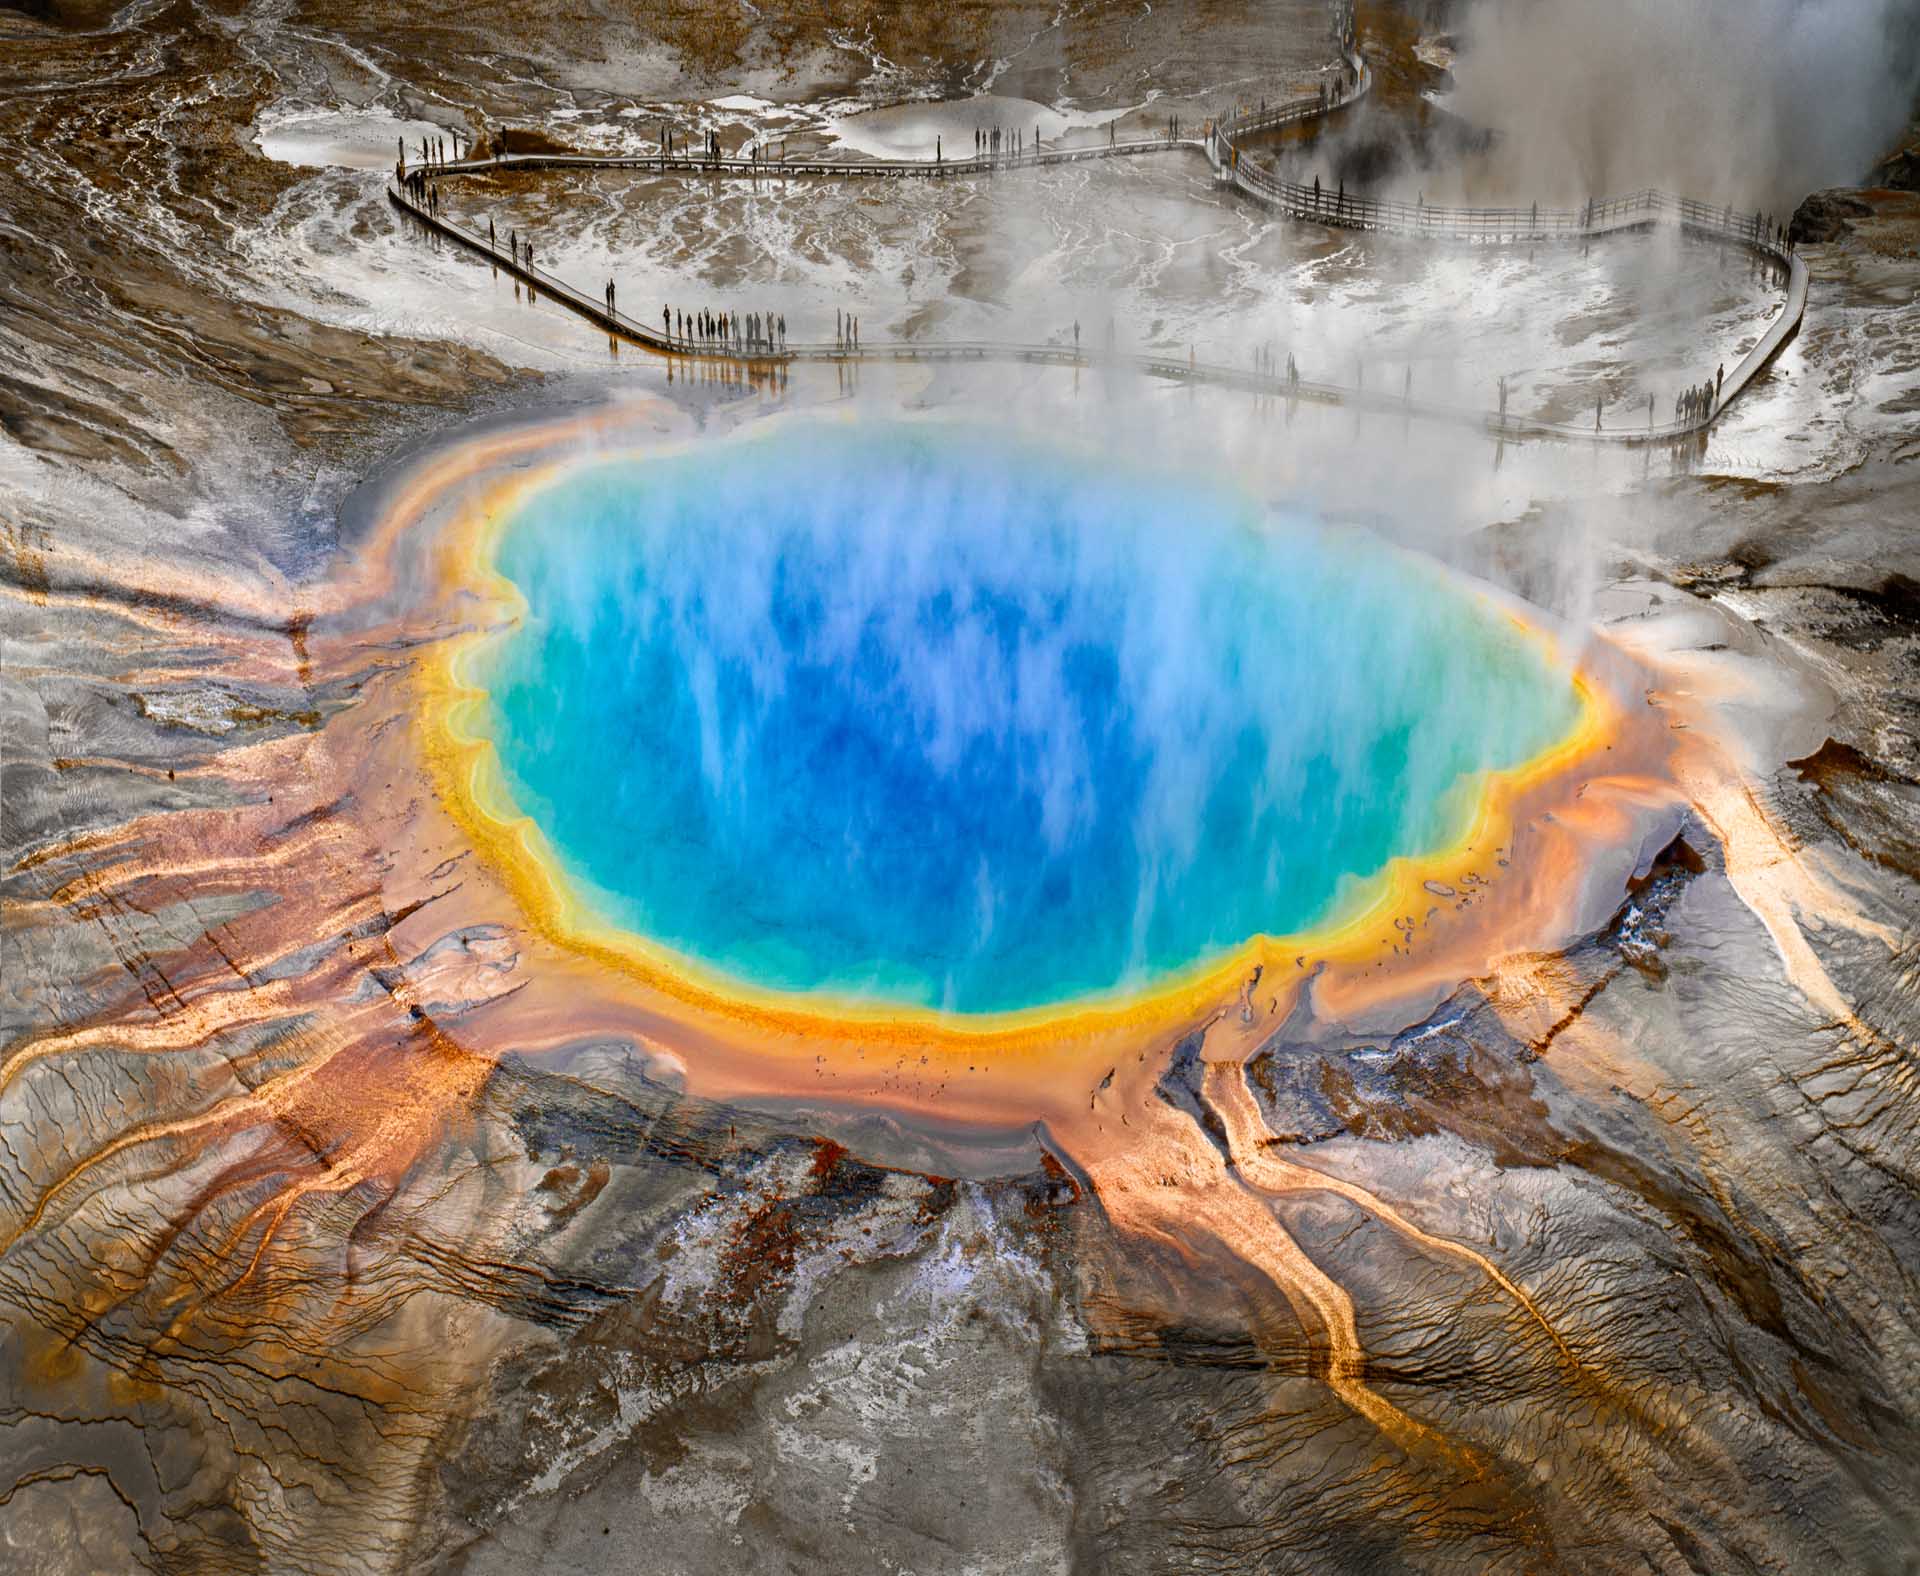 Grand Prismatic Spring, Midway Geyser Basin, Yellowstone National Park